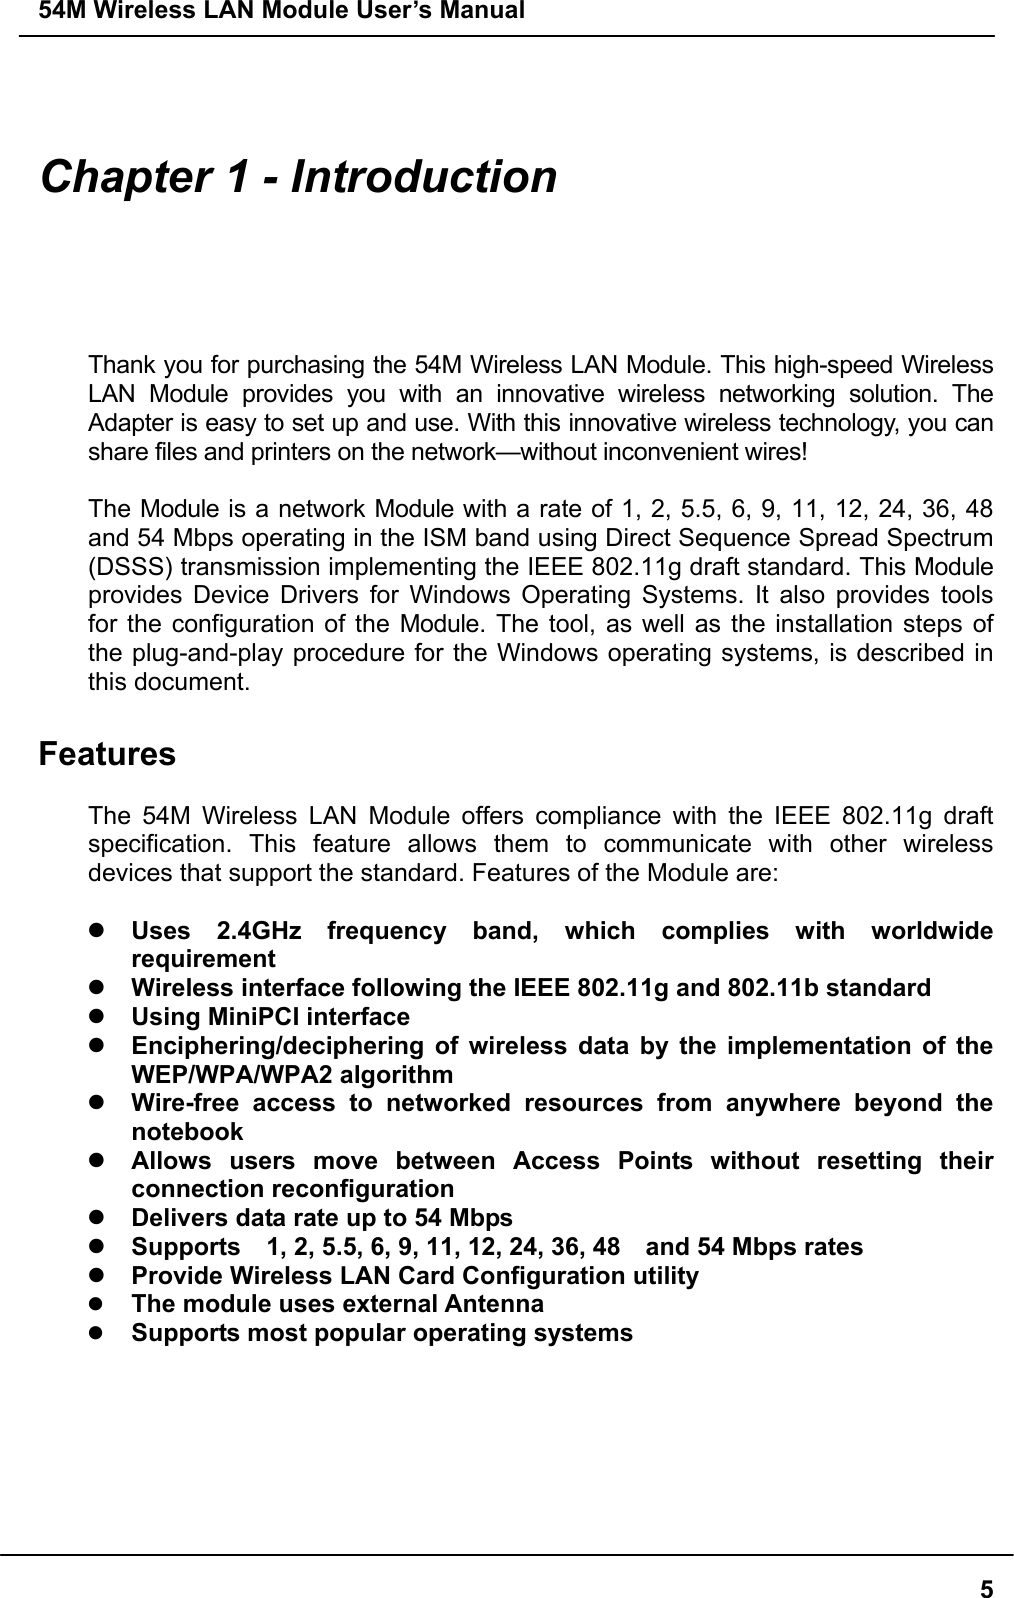 54M Wireless LAN Module User’s Manual  5  Chapter 1 - Introduction  Thank you for purchasing the 54M Wireless LAN Module. This high-speed Wireless LAN Module provides you with an innovative wireless networking solution. The Adapter is easy to set up and use. With this innovative wireless technology, you can share files and printers on the network—without inconvenient wires!    The Module is a network Module with a rate of 1, 2, 5.5, 6, 9, 11, 12, 24, 36, 48   and 54 Mbps operating in the ISM band using Direct Sequence Spread Spectrum (DSSS) transmission implementing the IEEE 802.11g draft standard. This Module provides Device Drivers for Windows Operating Systems. It also provides tools for the configuration of the Module. The tool, as well as the installation steps of the plug-and-play procedure for the Windows operating systems, is described in this document.  Features  The 54M Wireless LAN Module offers compliance with the IEEE 802.11g draft specification. This feature allows them to communicate with other wireless devices that support the standard. Features of the Module are:   Uses 2.4GHz frequency band, which complies with worldwide requirement  Wireless interface following the IEEE 802.11g and 802.11b standard    Using MiniPCI interface  Enciphering/deciphering of wireless data by the implementation of the WEP/WPA/WPA2 algorithm    Wire-free access to networked resources from anywhere beyond the notebook  Allows users move between Access Points without resetting their connection reconfiguration  Delivers data rate up to 54 Mbps  Supports    1, 2, 5.5, 6, 9, 11, 12, 24, 36, 48    and 54 Mbps rates  Provide Wireless LAN Card Configuration utility   The module uses external Antenna     Supports most popular operating systems  